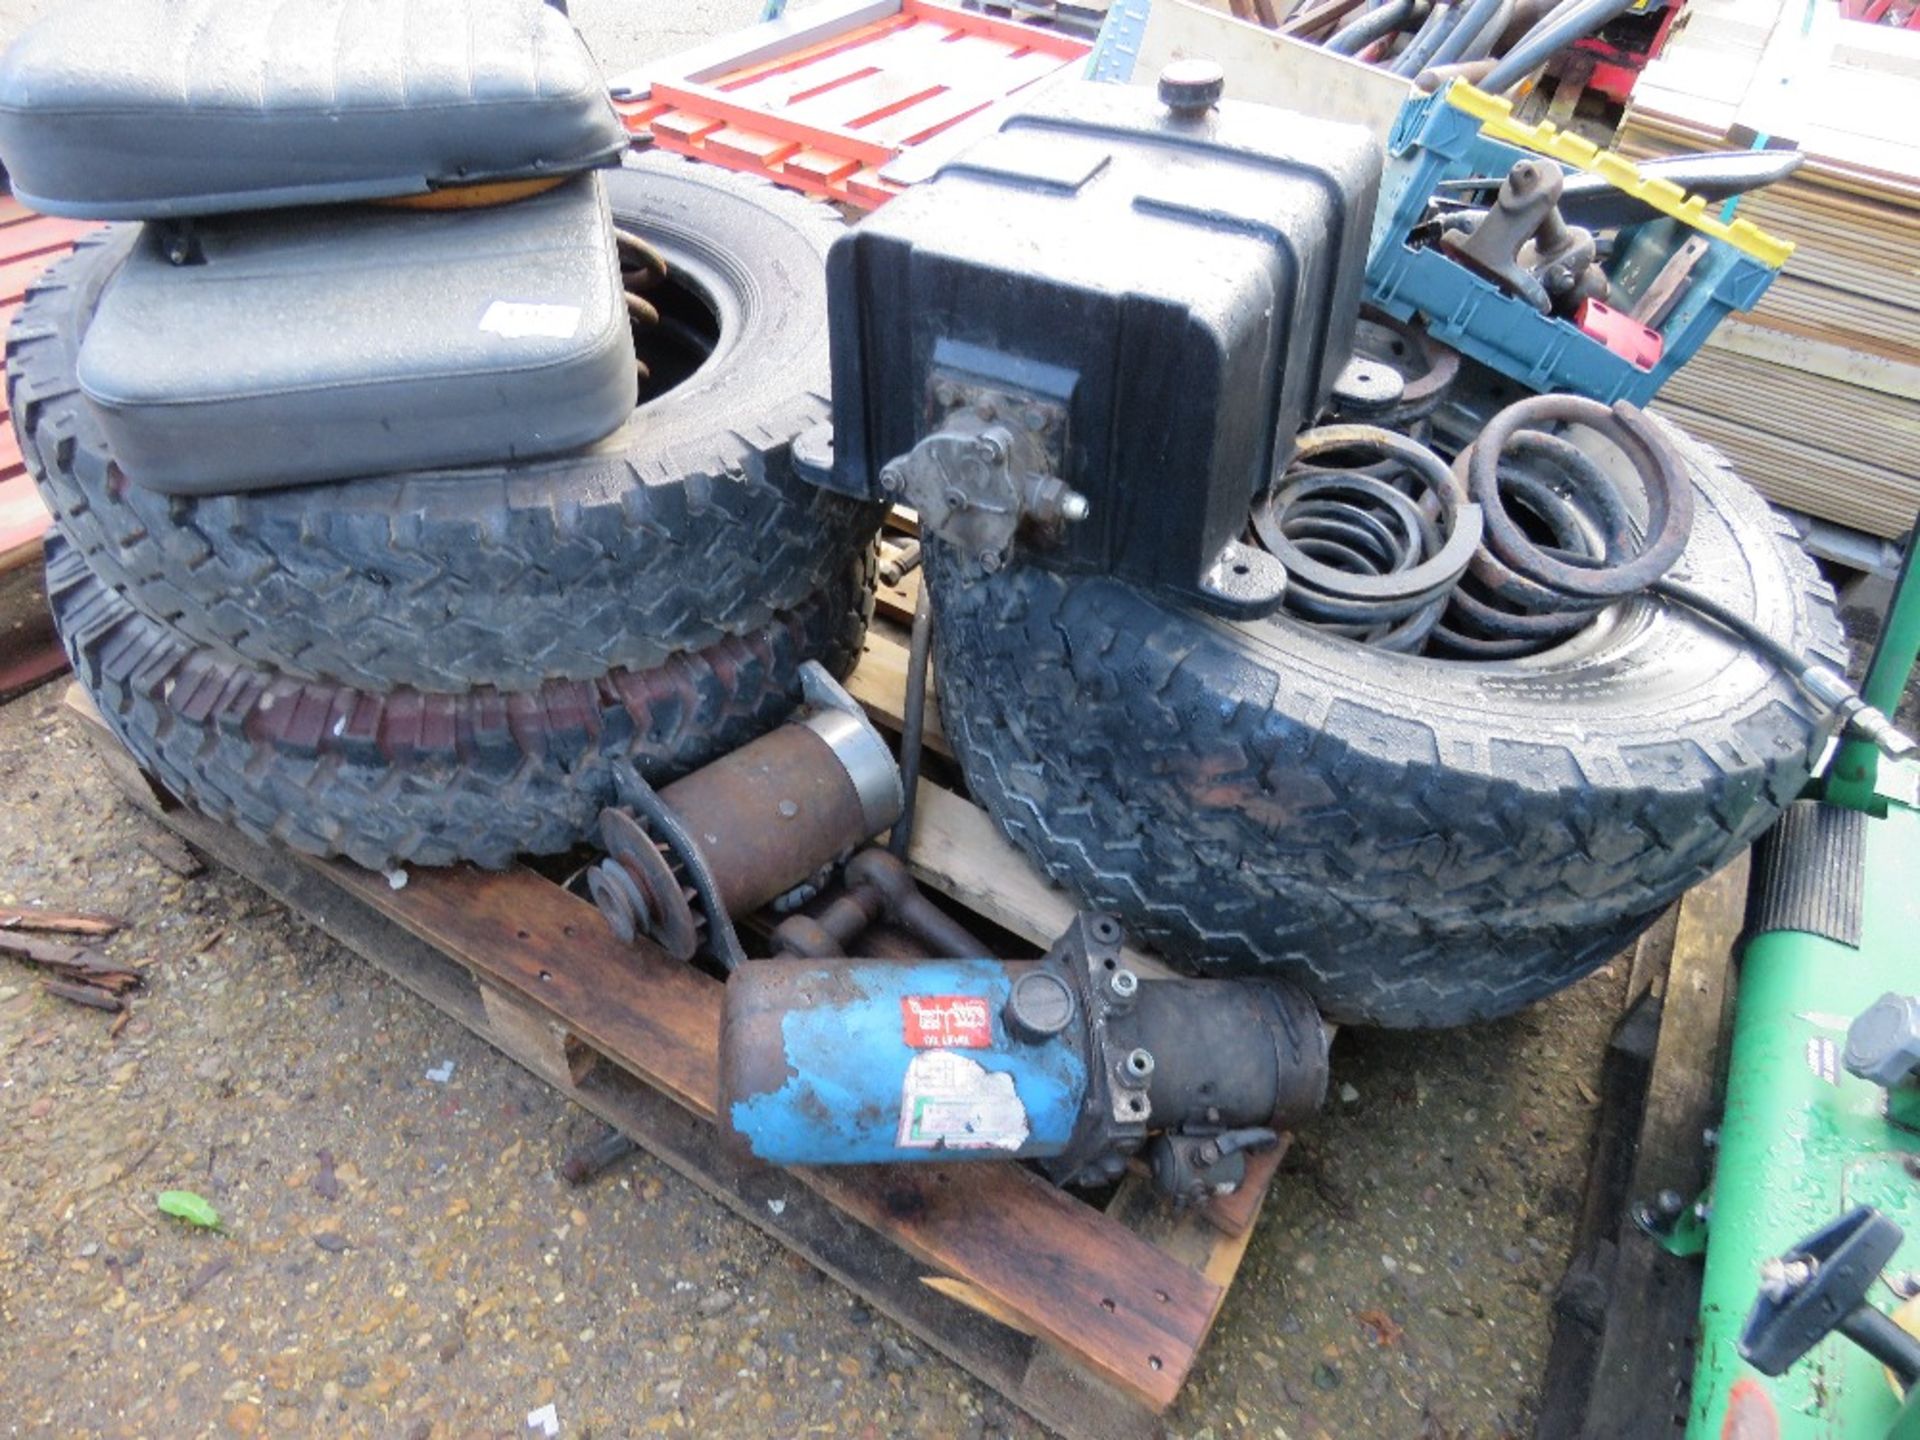 ASSORTED LANDROVER SPARES INCLUDING WHEELS, PLUS A HYDRAULIC PUMP UNIT. THIS LOT IS SOLD UNDER T - Image 6 of 6